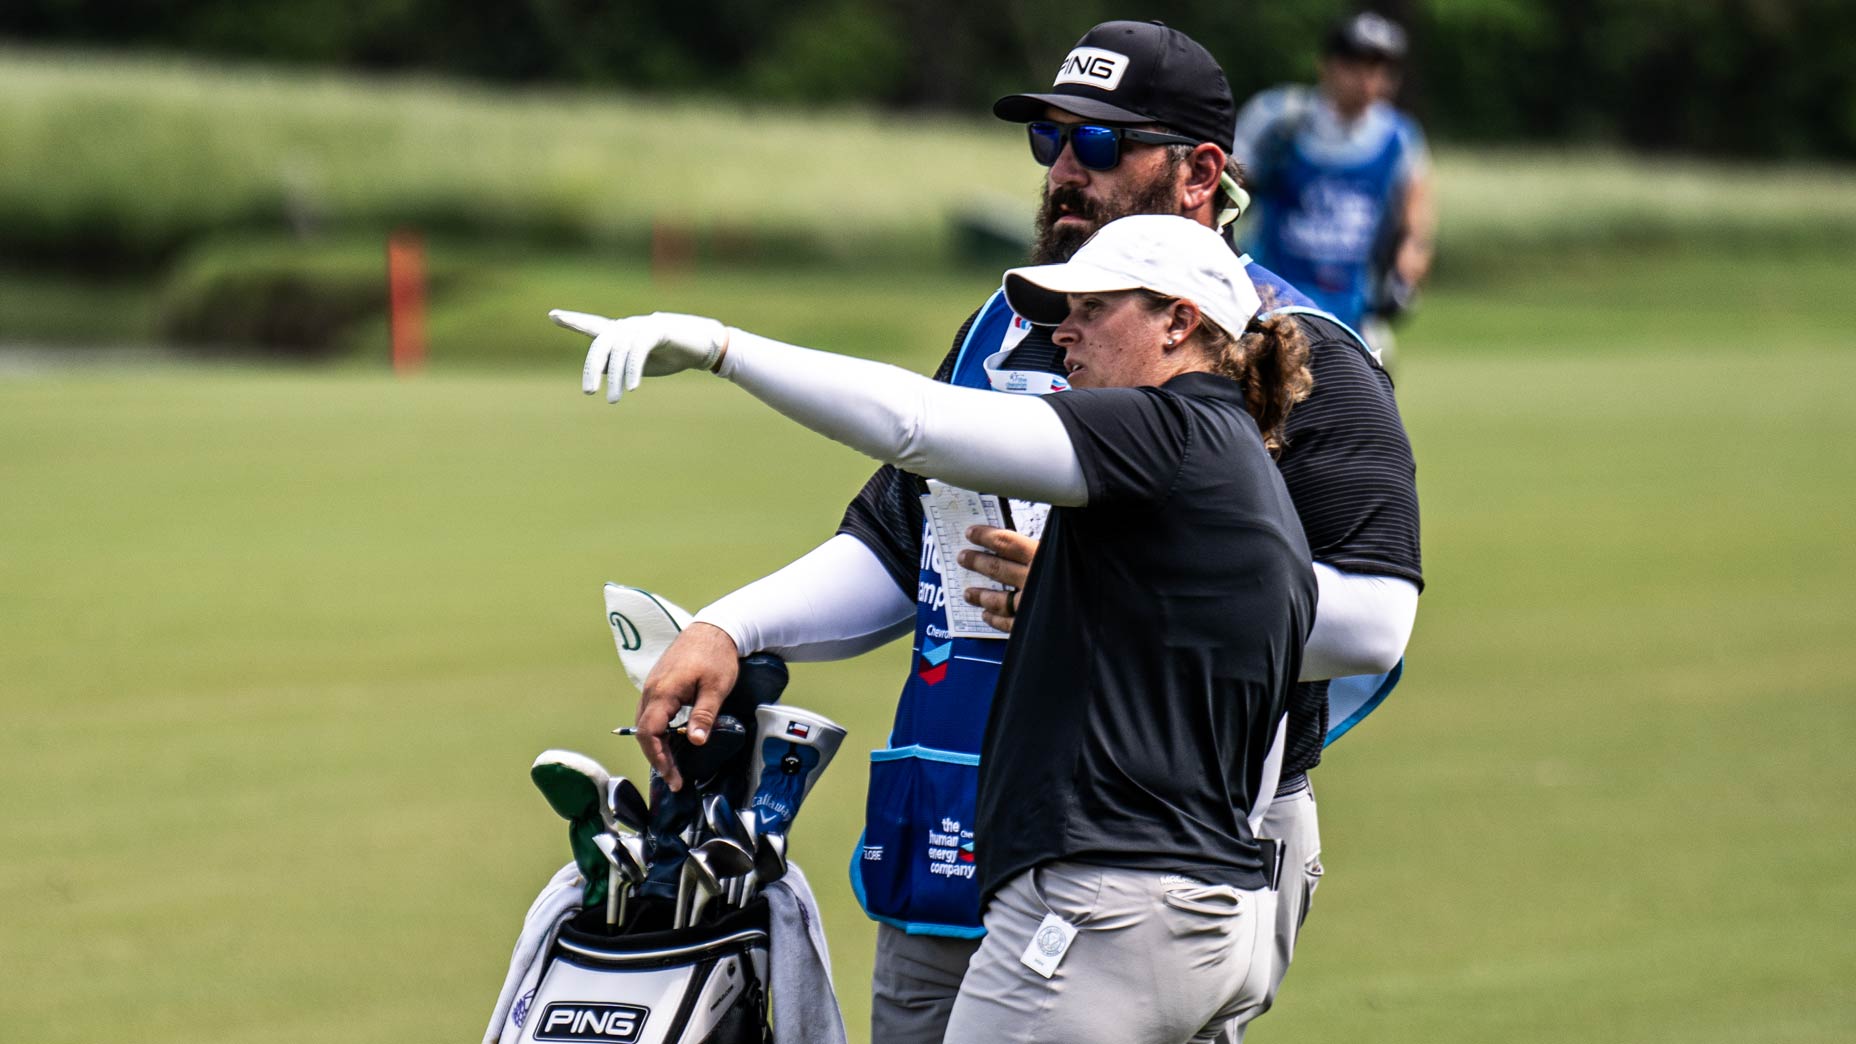 Lauren Coughlin talks with her caddie at the Chevron Championship.